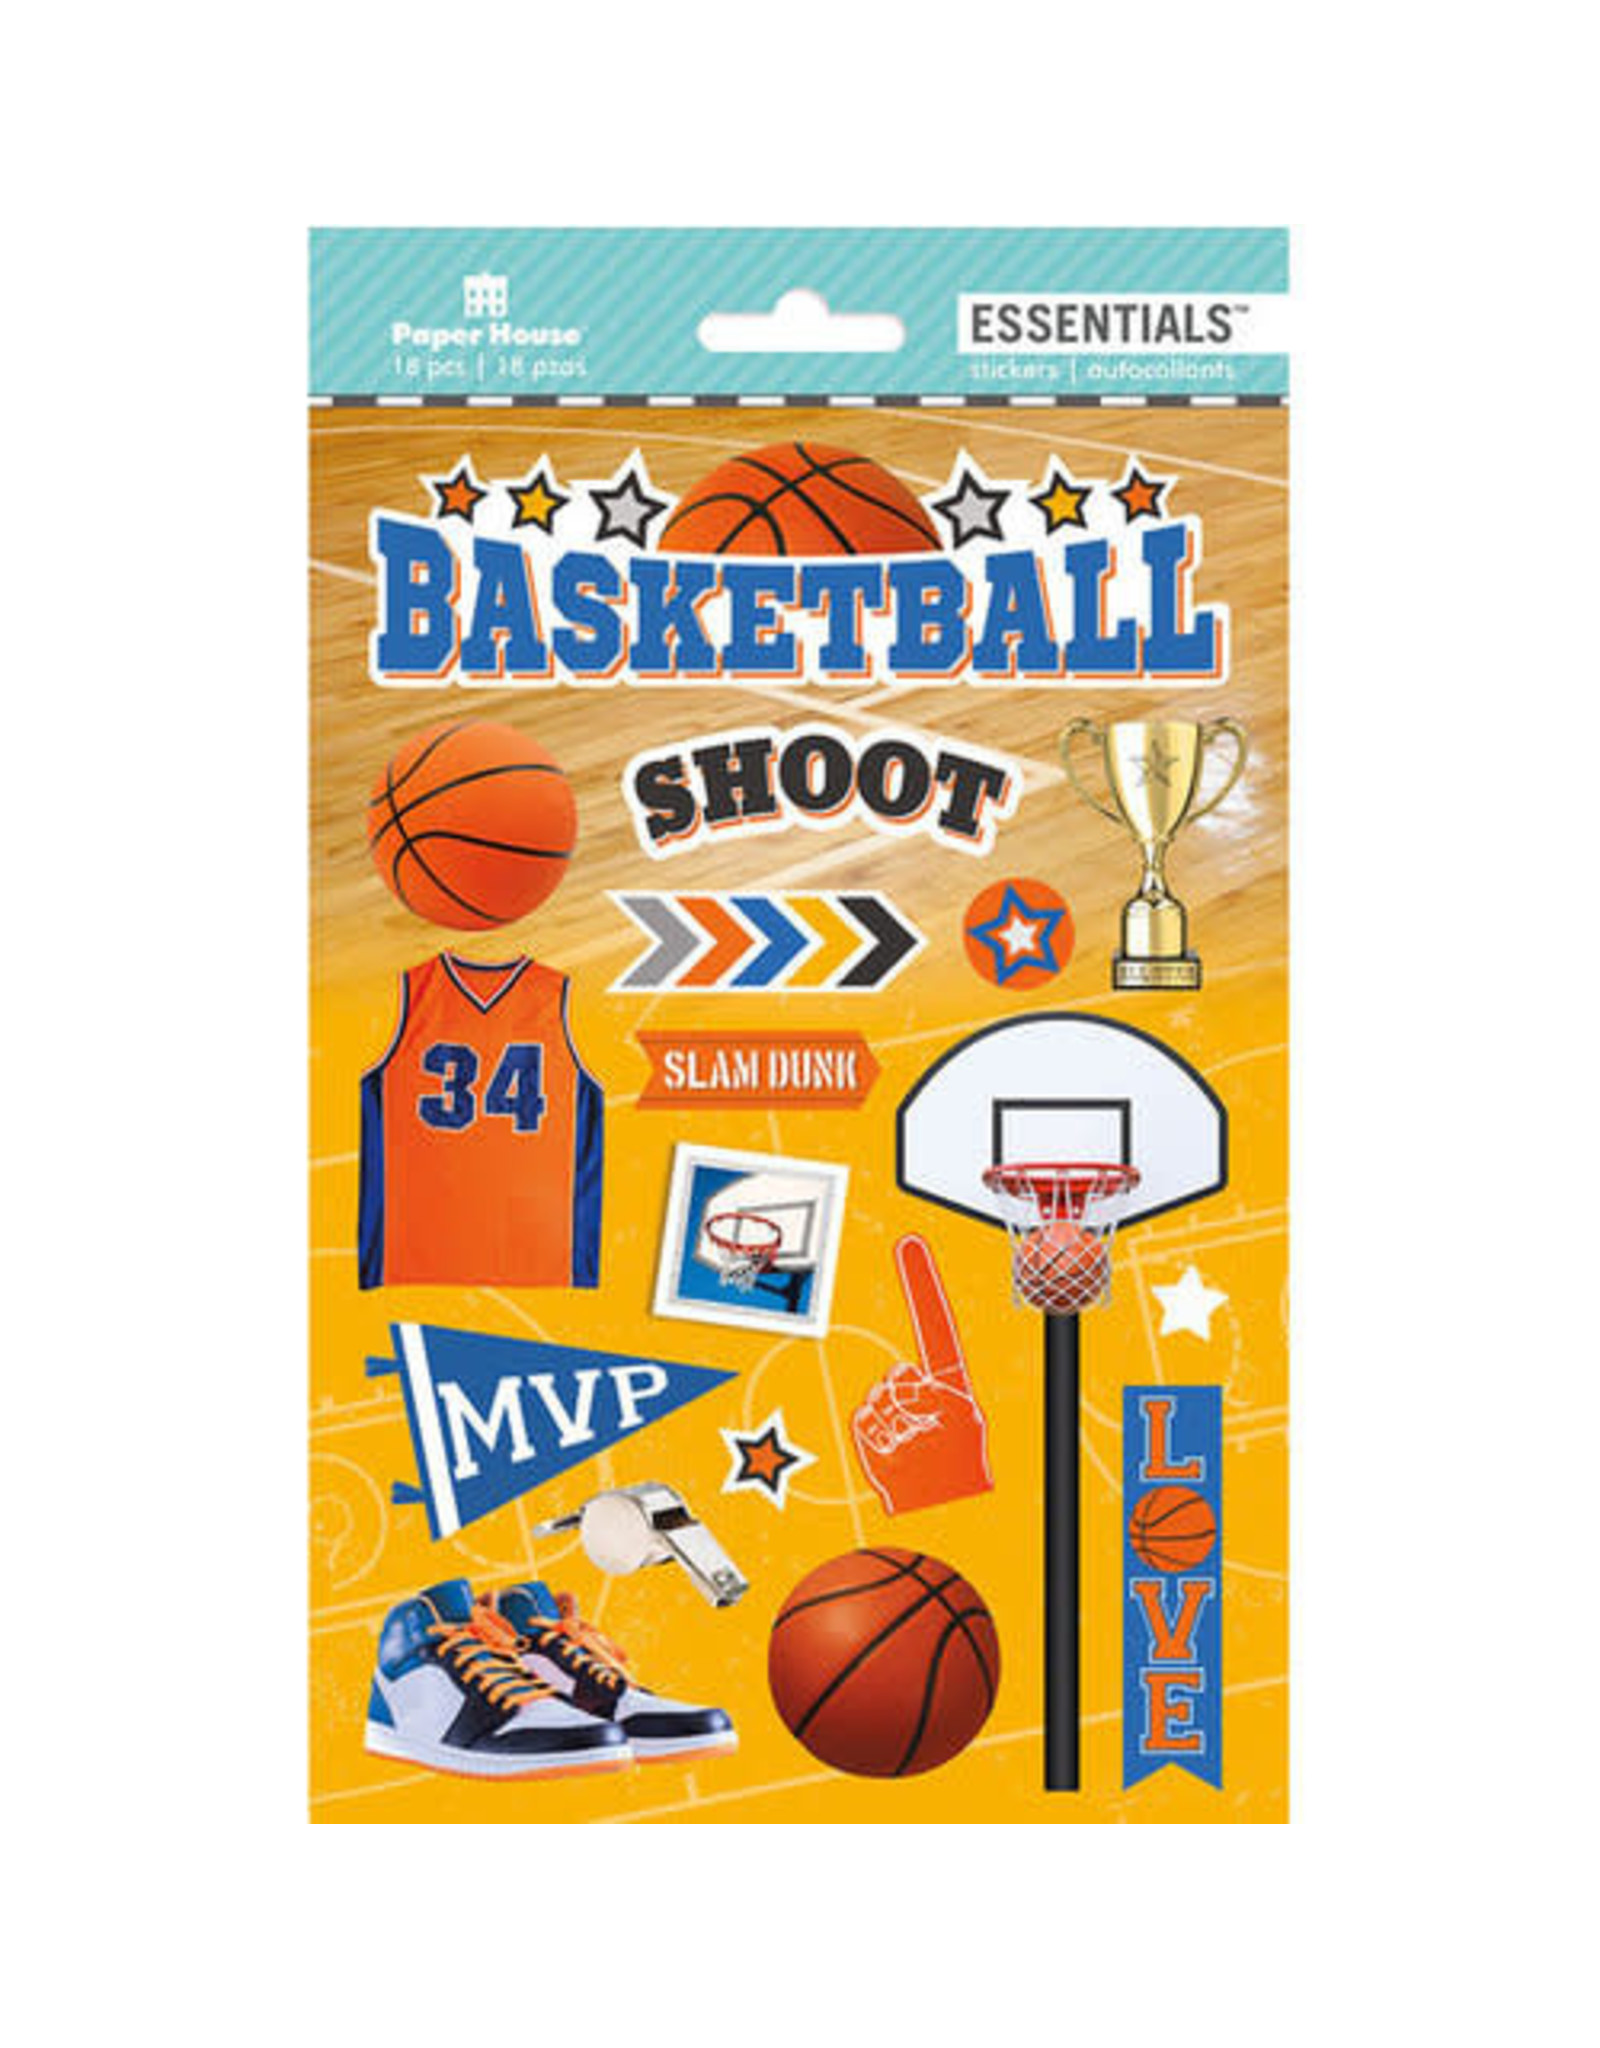 PAPER HOUSE PRODUCTIONS PAPER HOUSE BASKETBALL ESSENTIALS 3D STICKERS